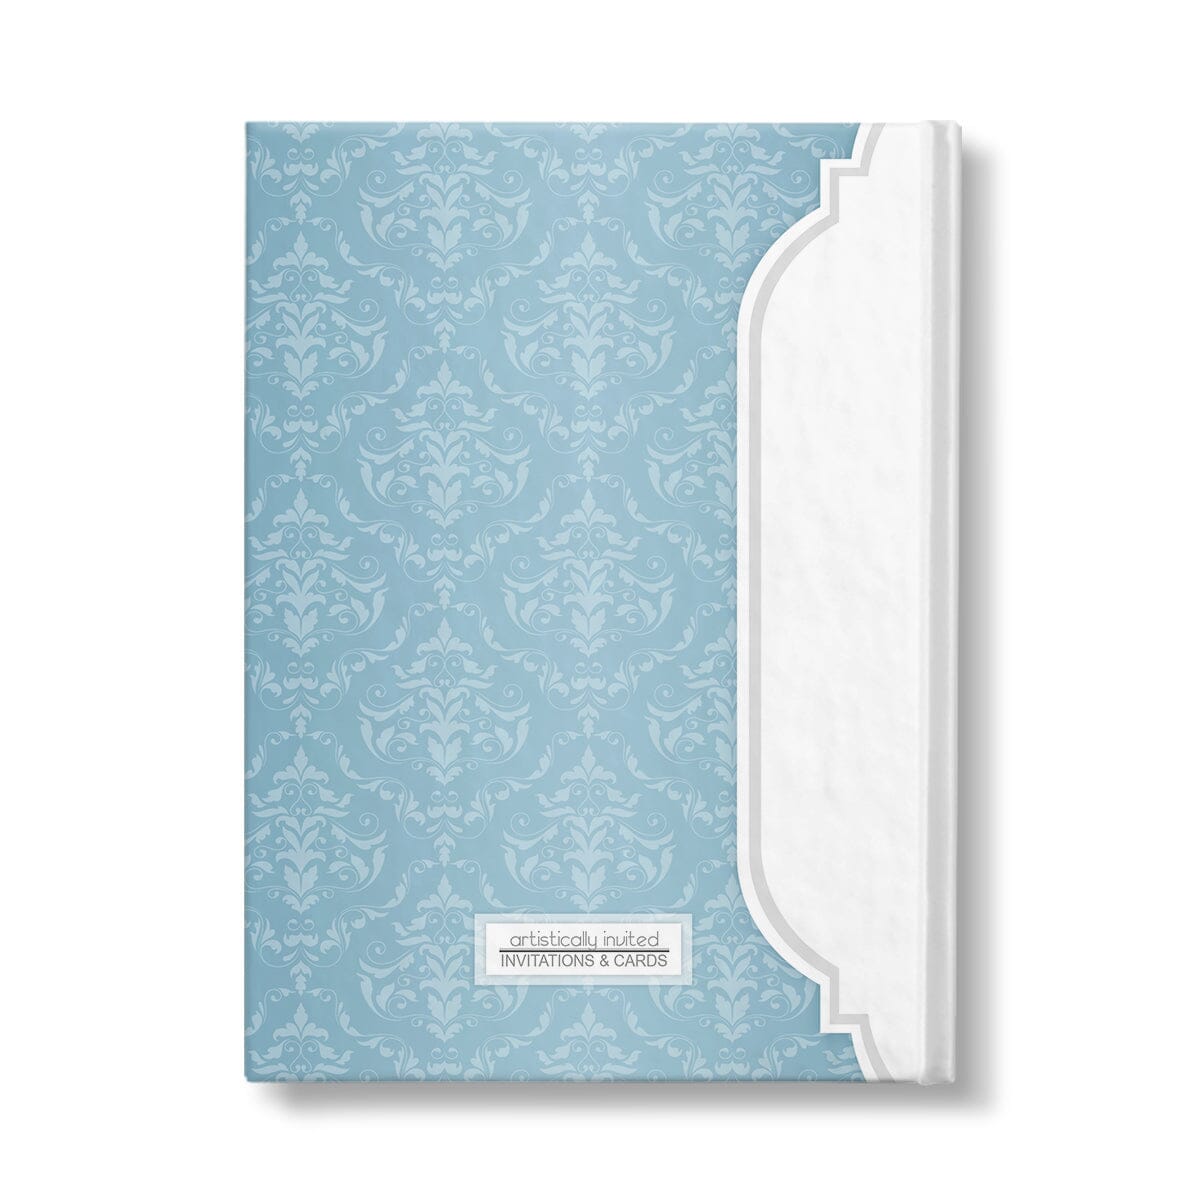 Personalized Blue Damask Journal at Artistically Invited. Back side of the book.